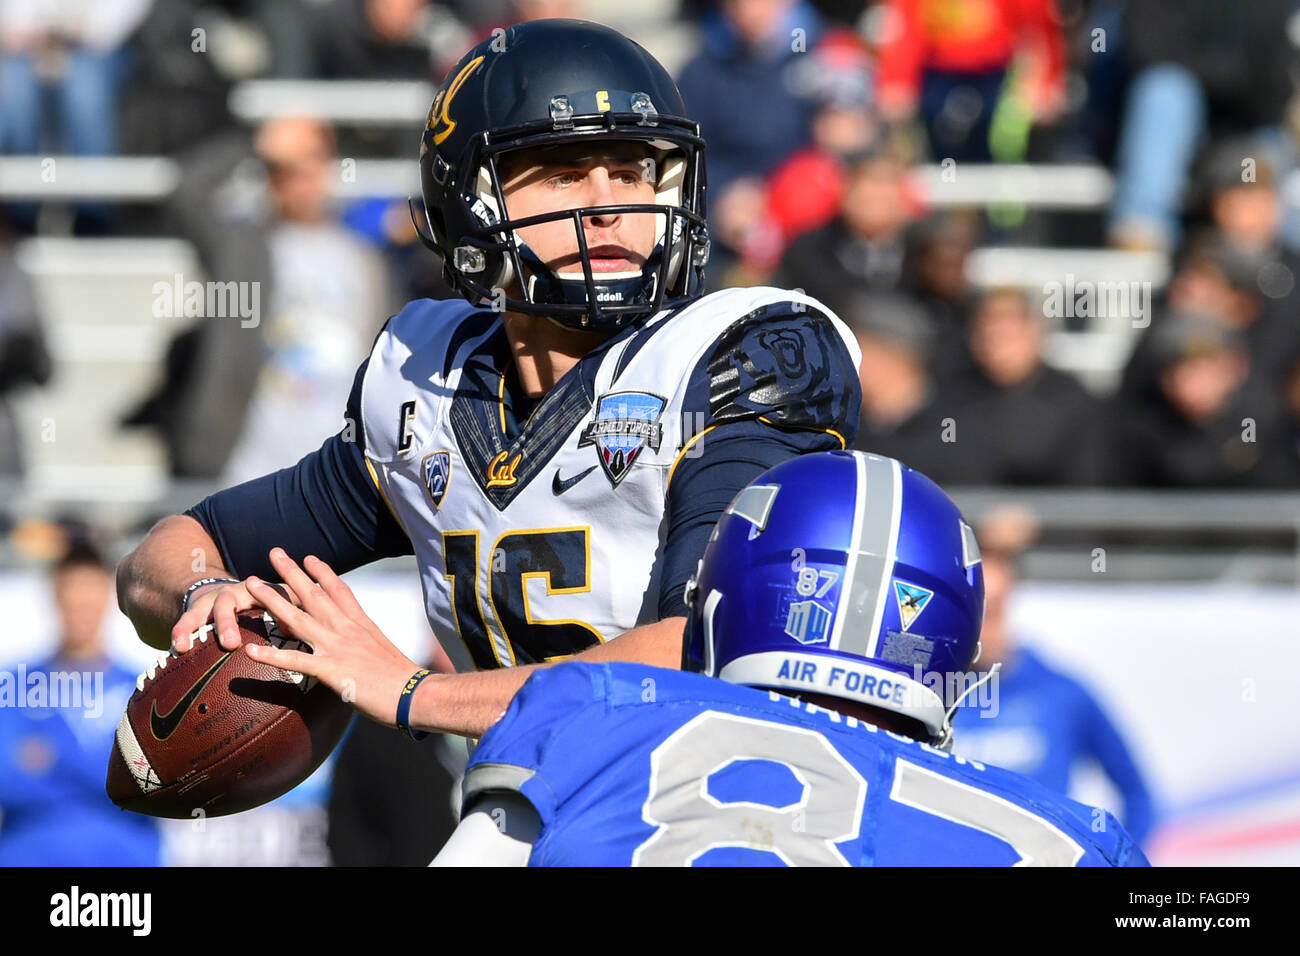 December 29, 2015: California Golden Bears quarterback Jared Goff (16) passed for 467 yards on 25 of 37 passing and threw six touchdowns tied for the second most in FBS bowl history during the Lockheed Martin Armed Forces Bowl between California Golden Bears and the Air Force Falcons at Amon G. Carter Stadium, Ft. Worth, Texas. Shane Roper/CSM Stock Photo